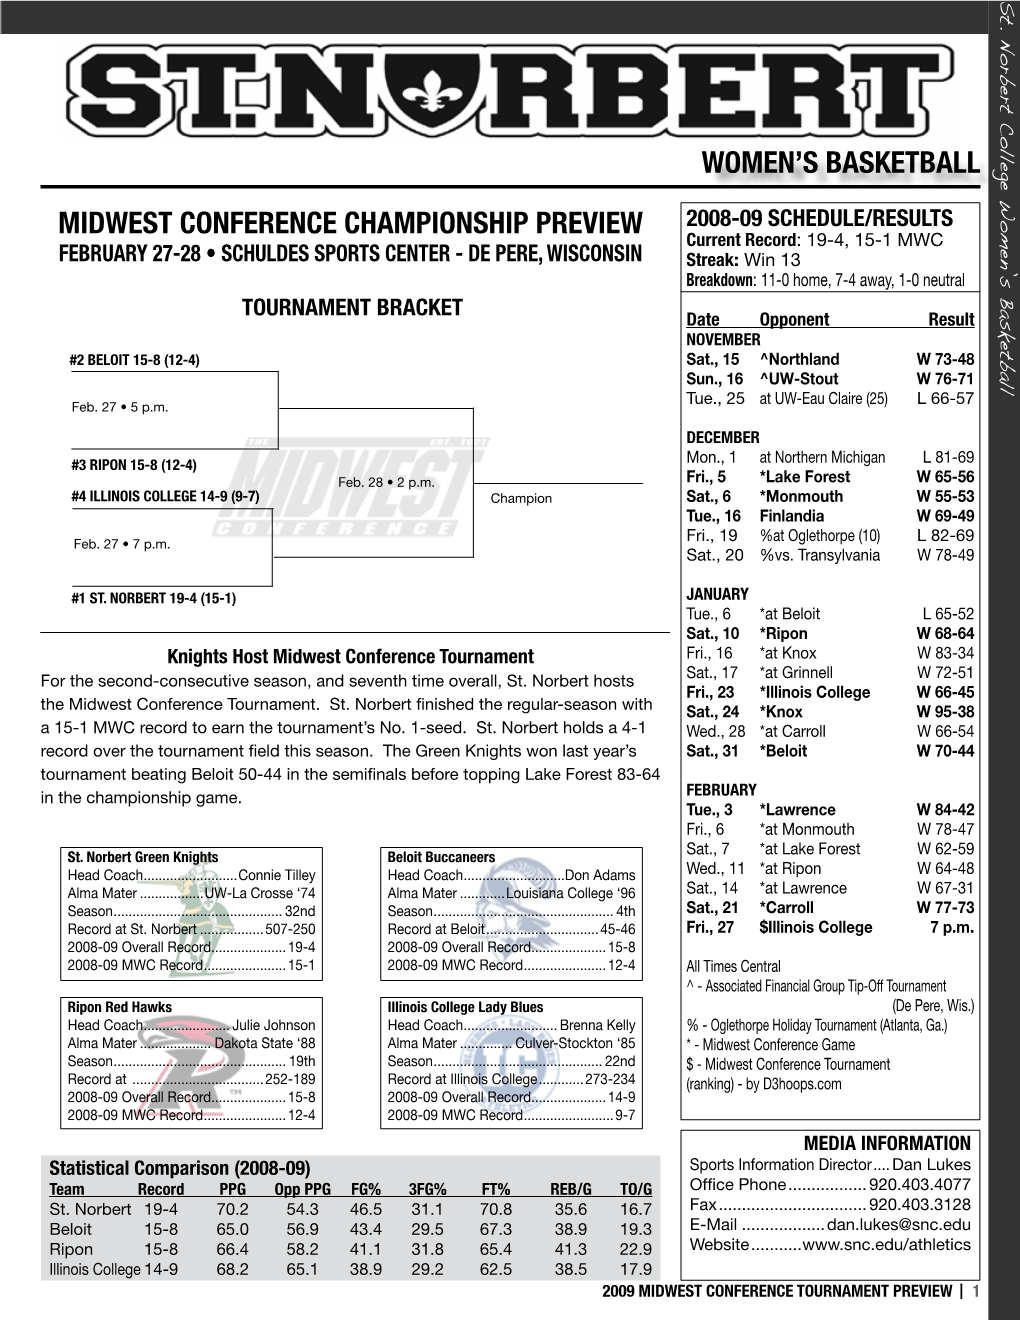 Women's Basketball Midwest Conference Championship Preview